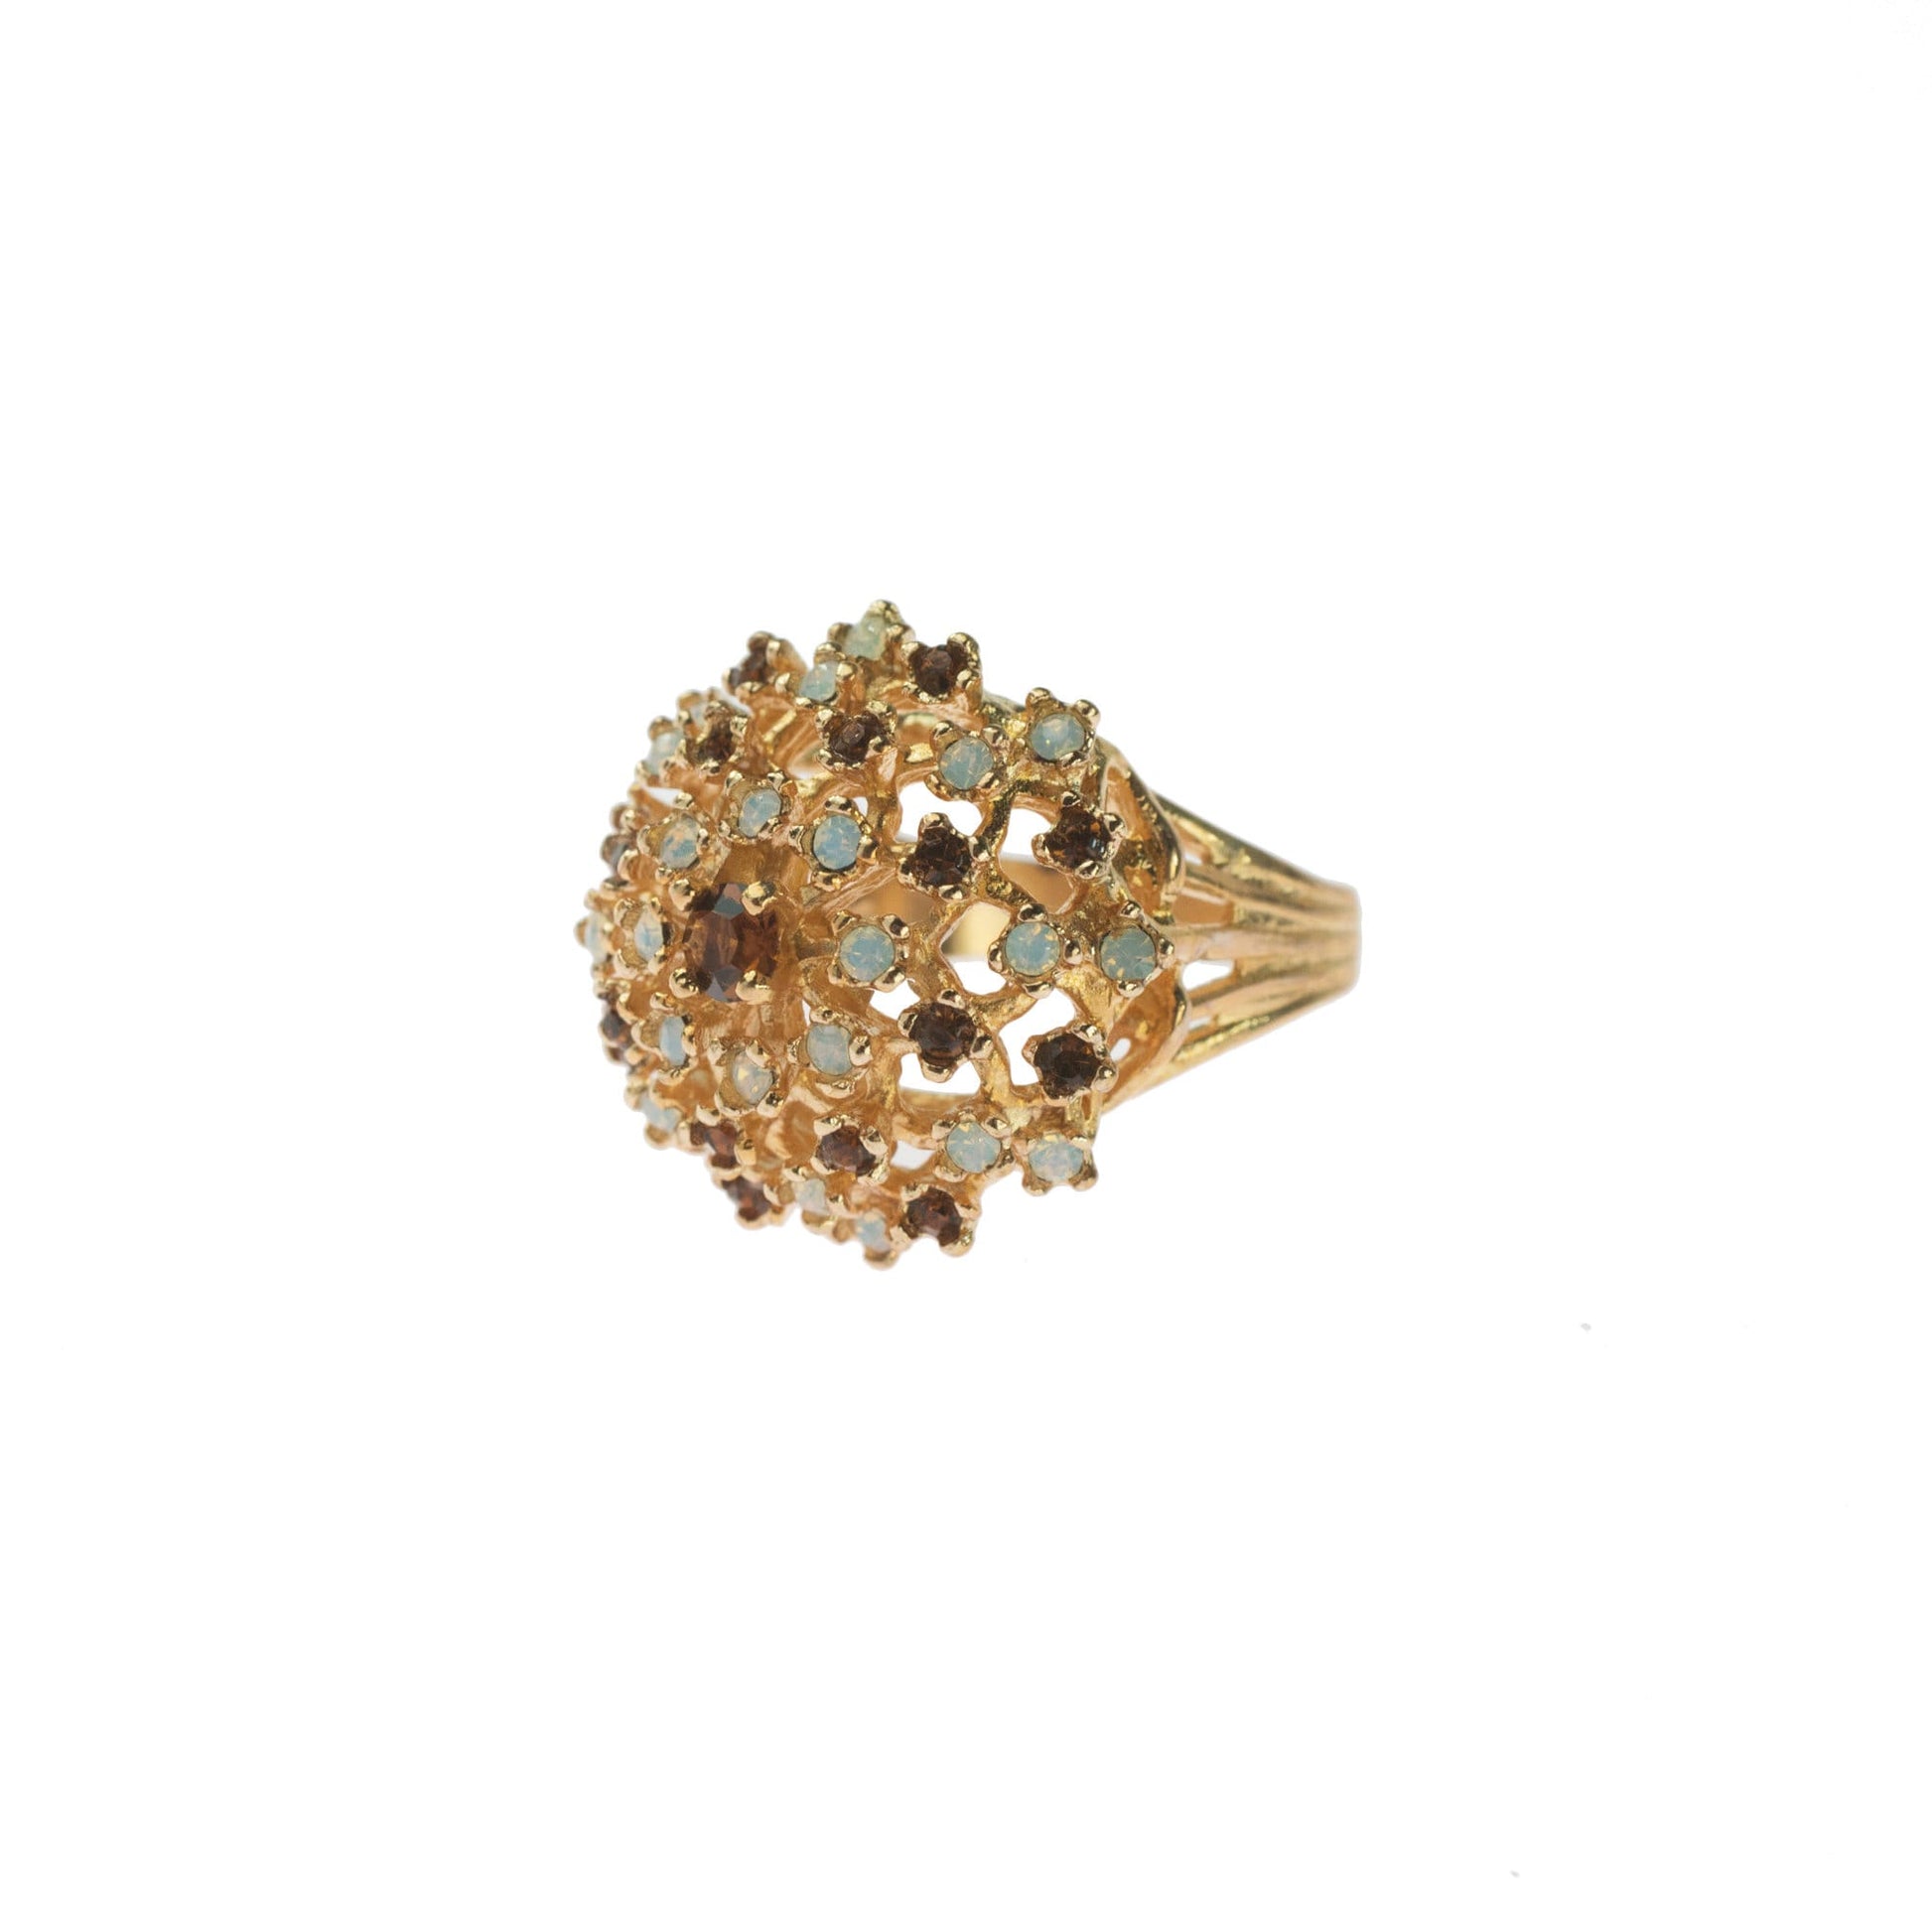 Vintage Ring Smokey Topaz Crystal and Pinfire Opal Burst Ring 18k Gold Antique Jewelry for Women R195 - Limited Stock - Never Worn